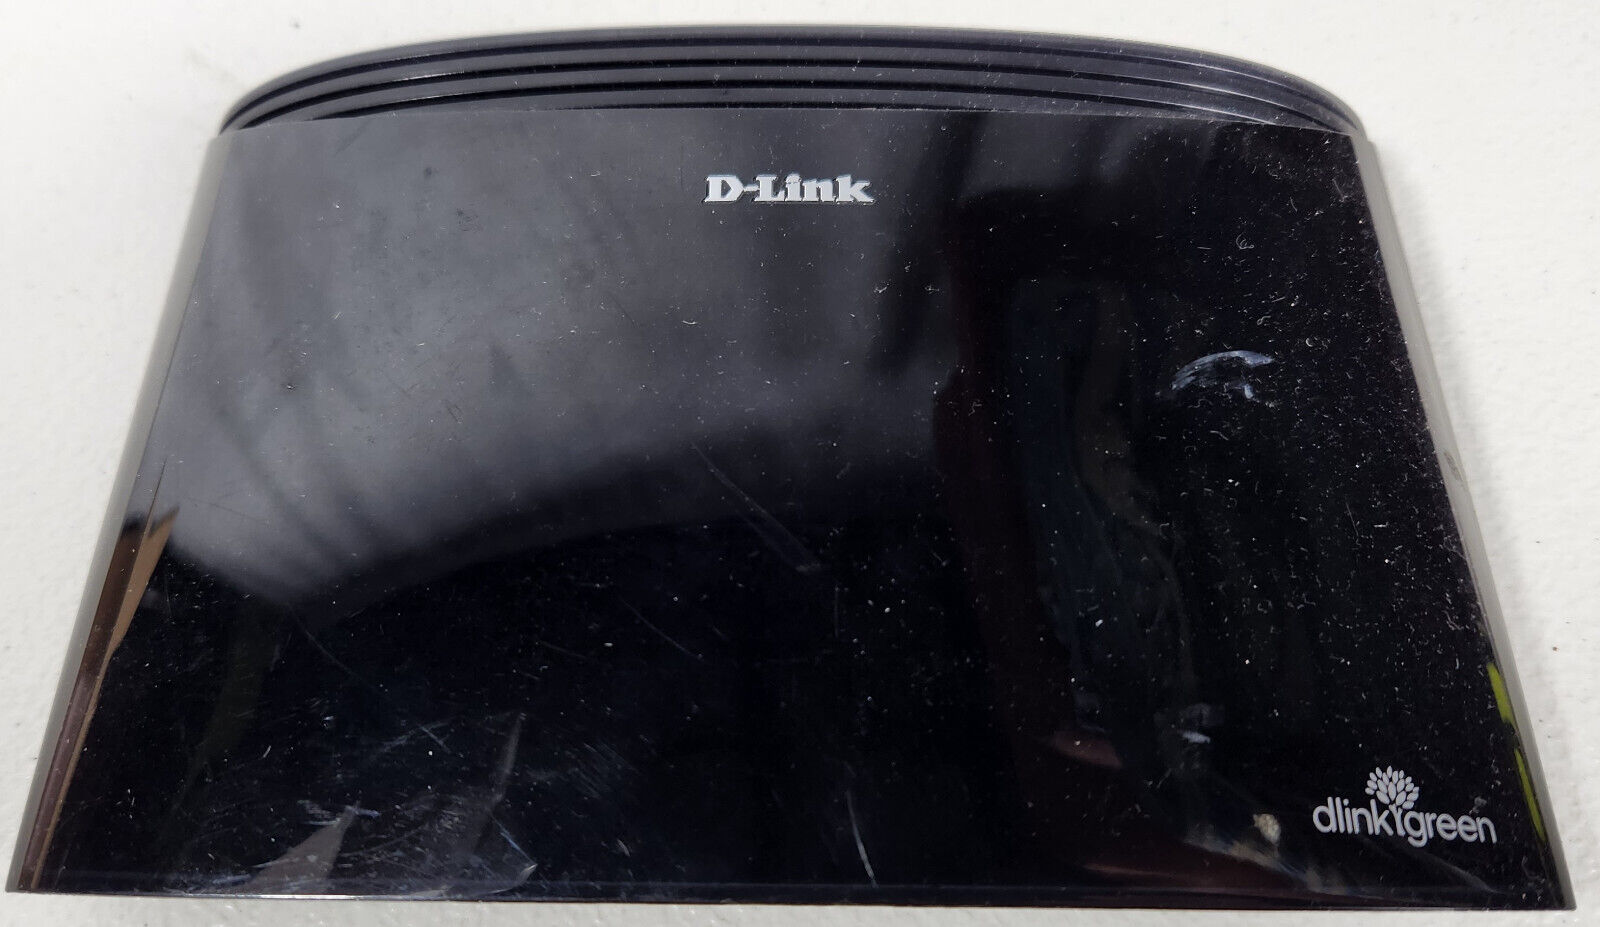 D-Link DGS-1008G 8-Port Unmanaged Desktop Switch Black with Power Adapter